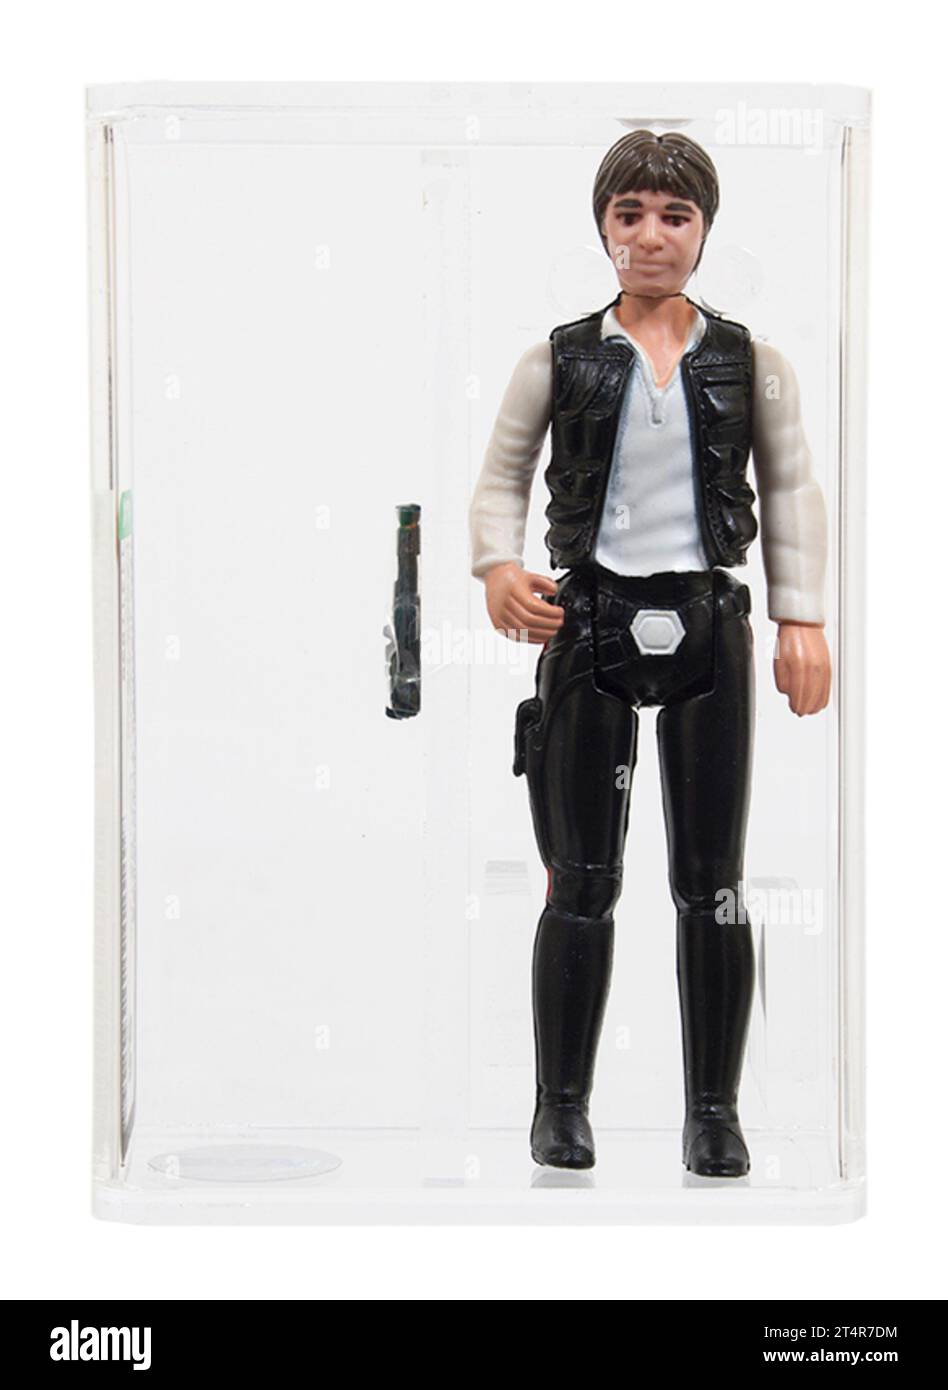 Kenner Star Wars Han Solo Action Figure AFA Stock Photo